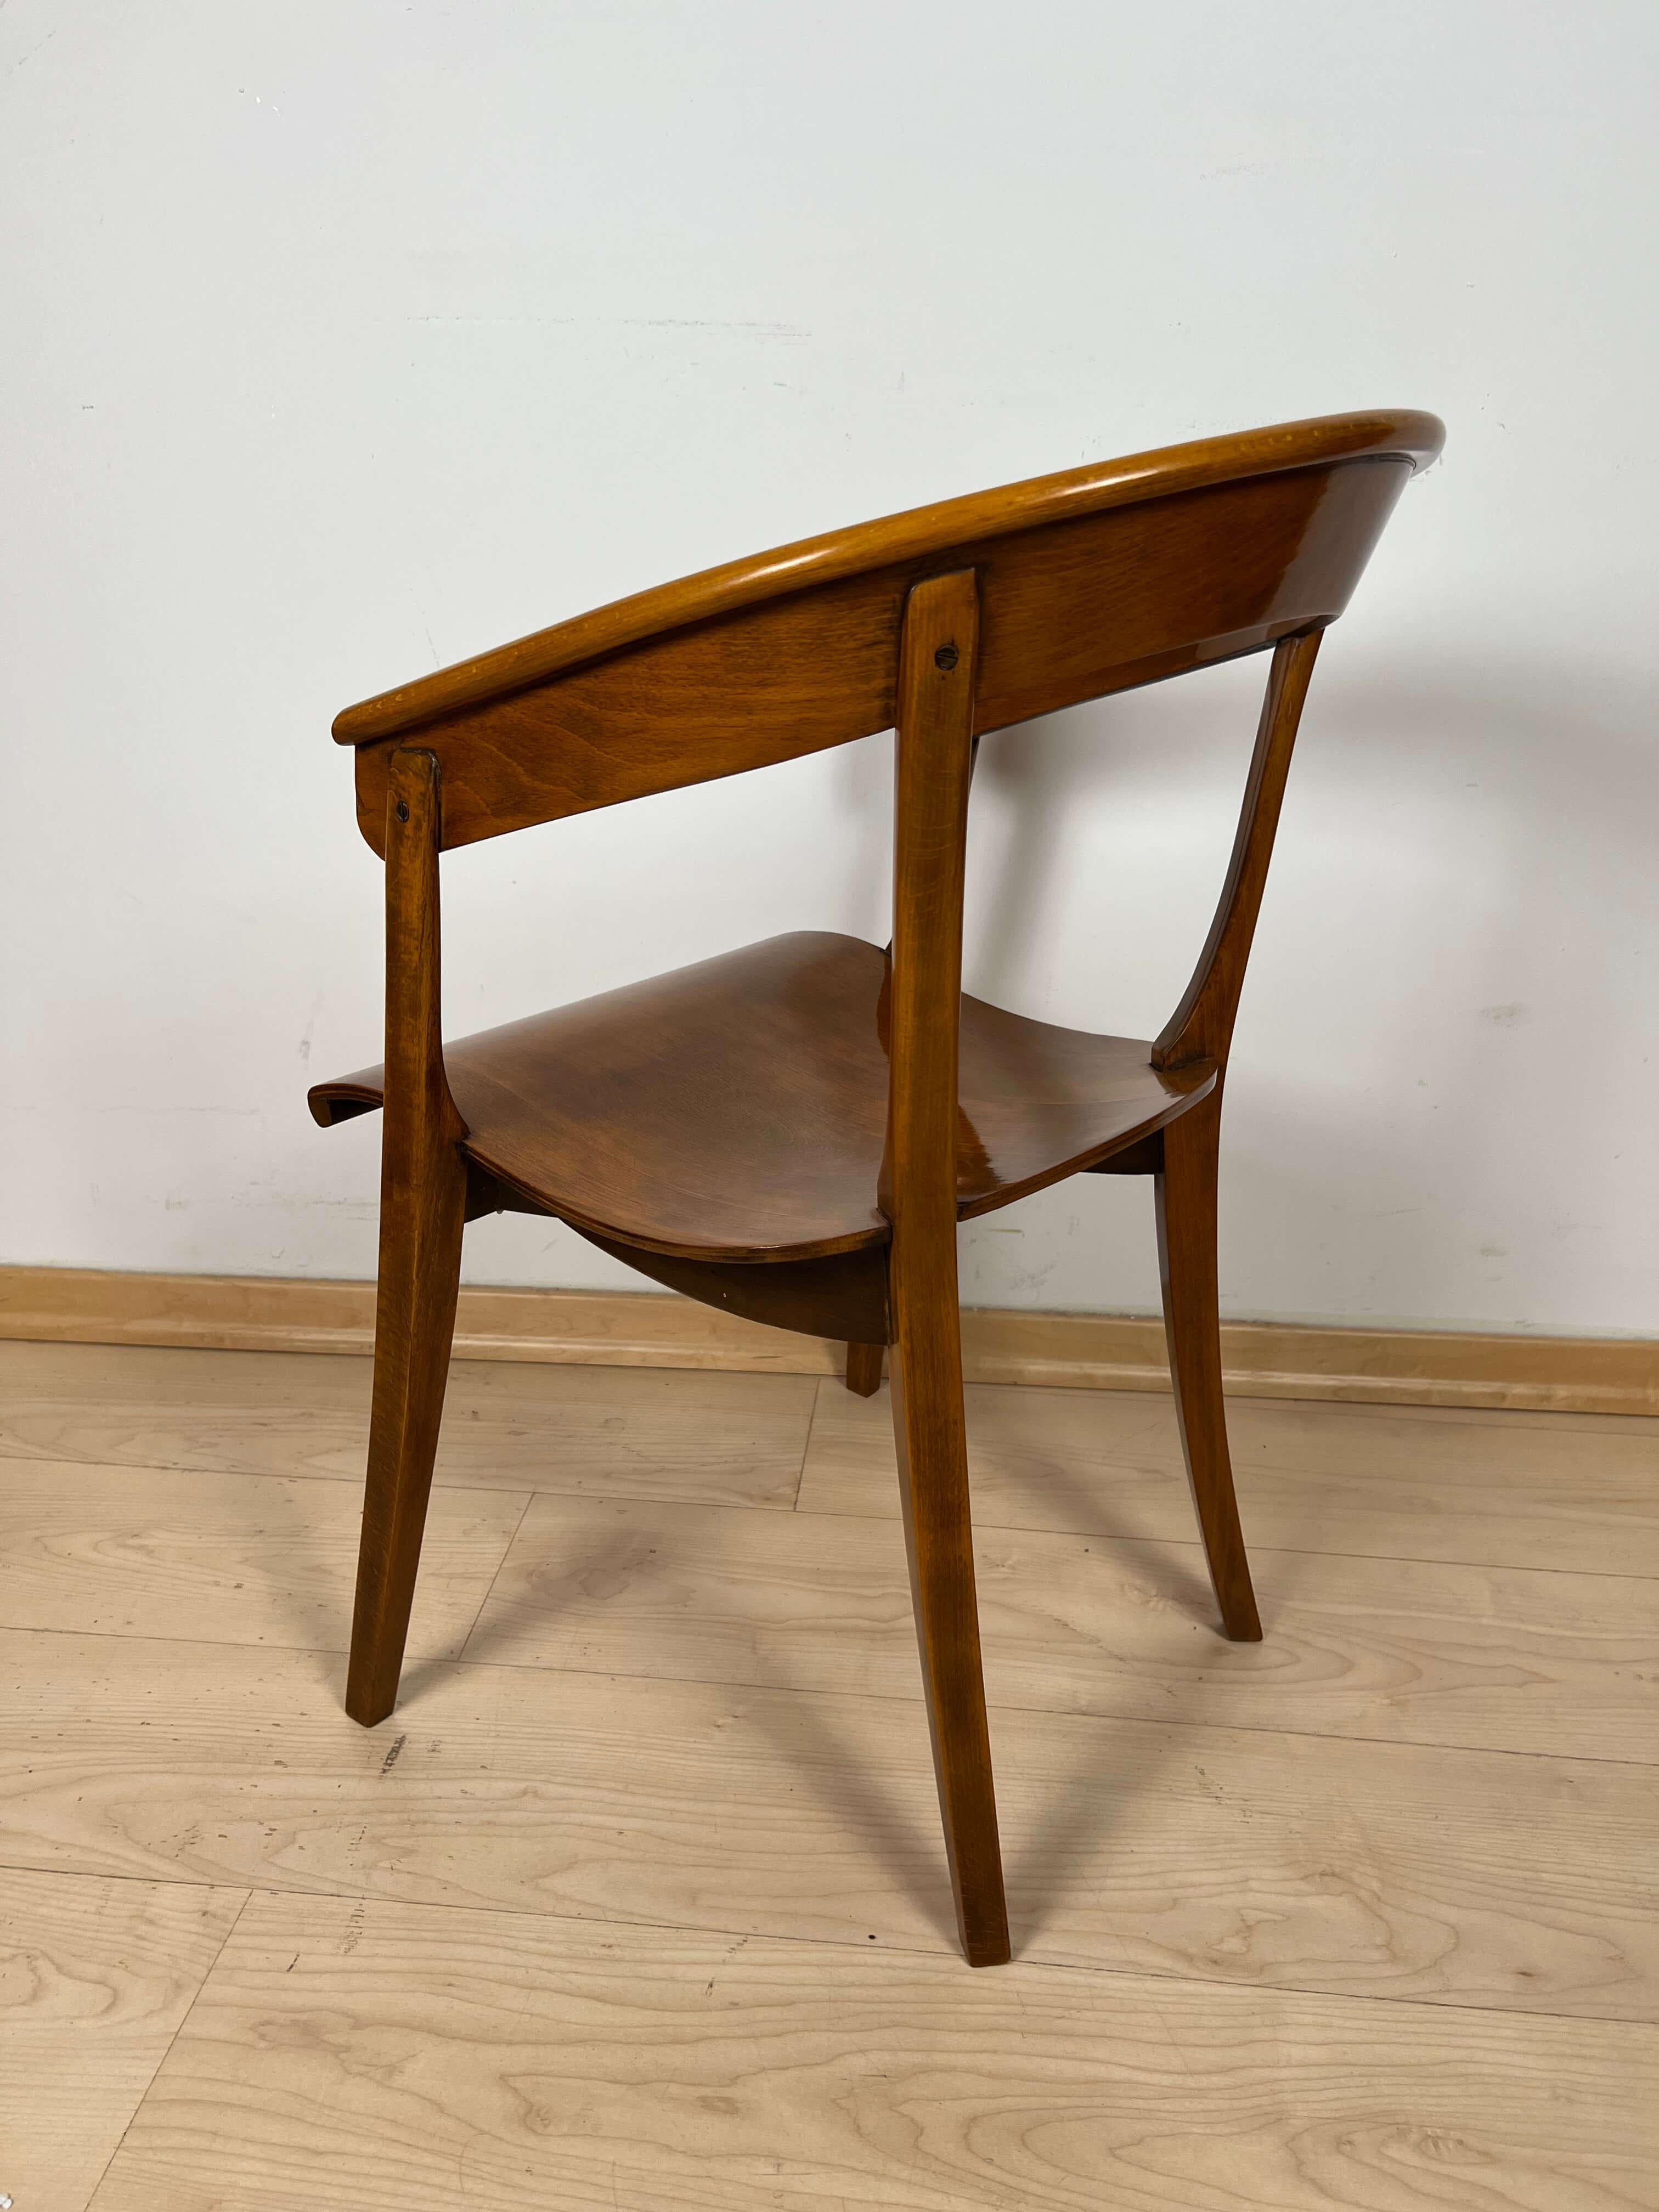 Beech Bauhaus Armchair by Rockhausen, Polished Wood, Germany, 1928 For Sale